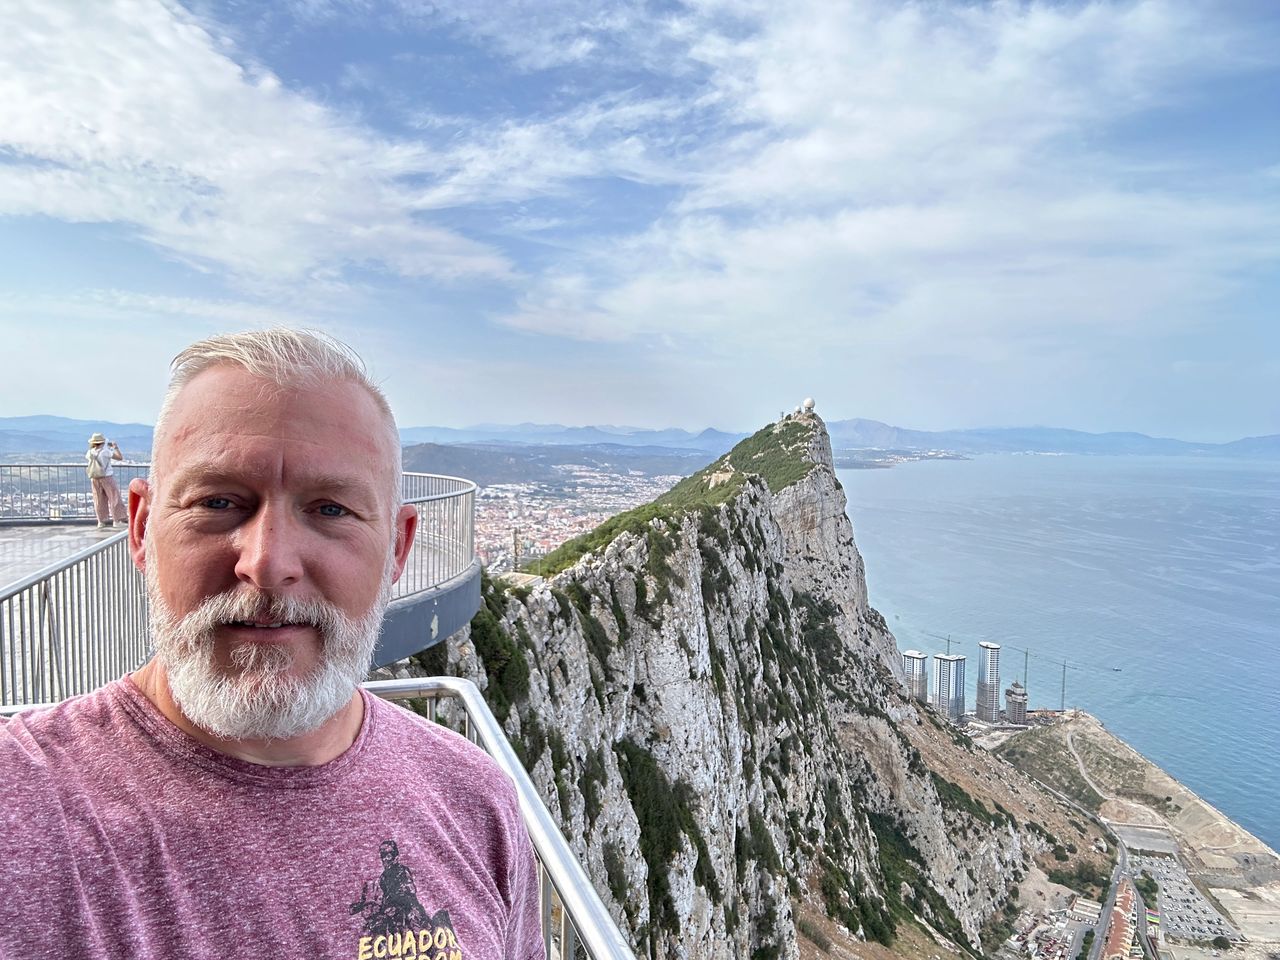 At the top of the Rock of Gibraltar